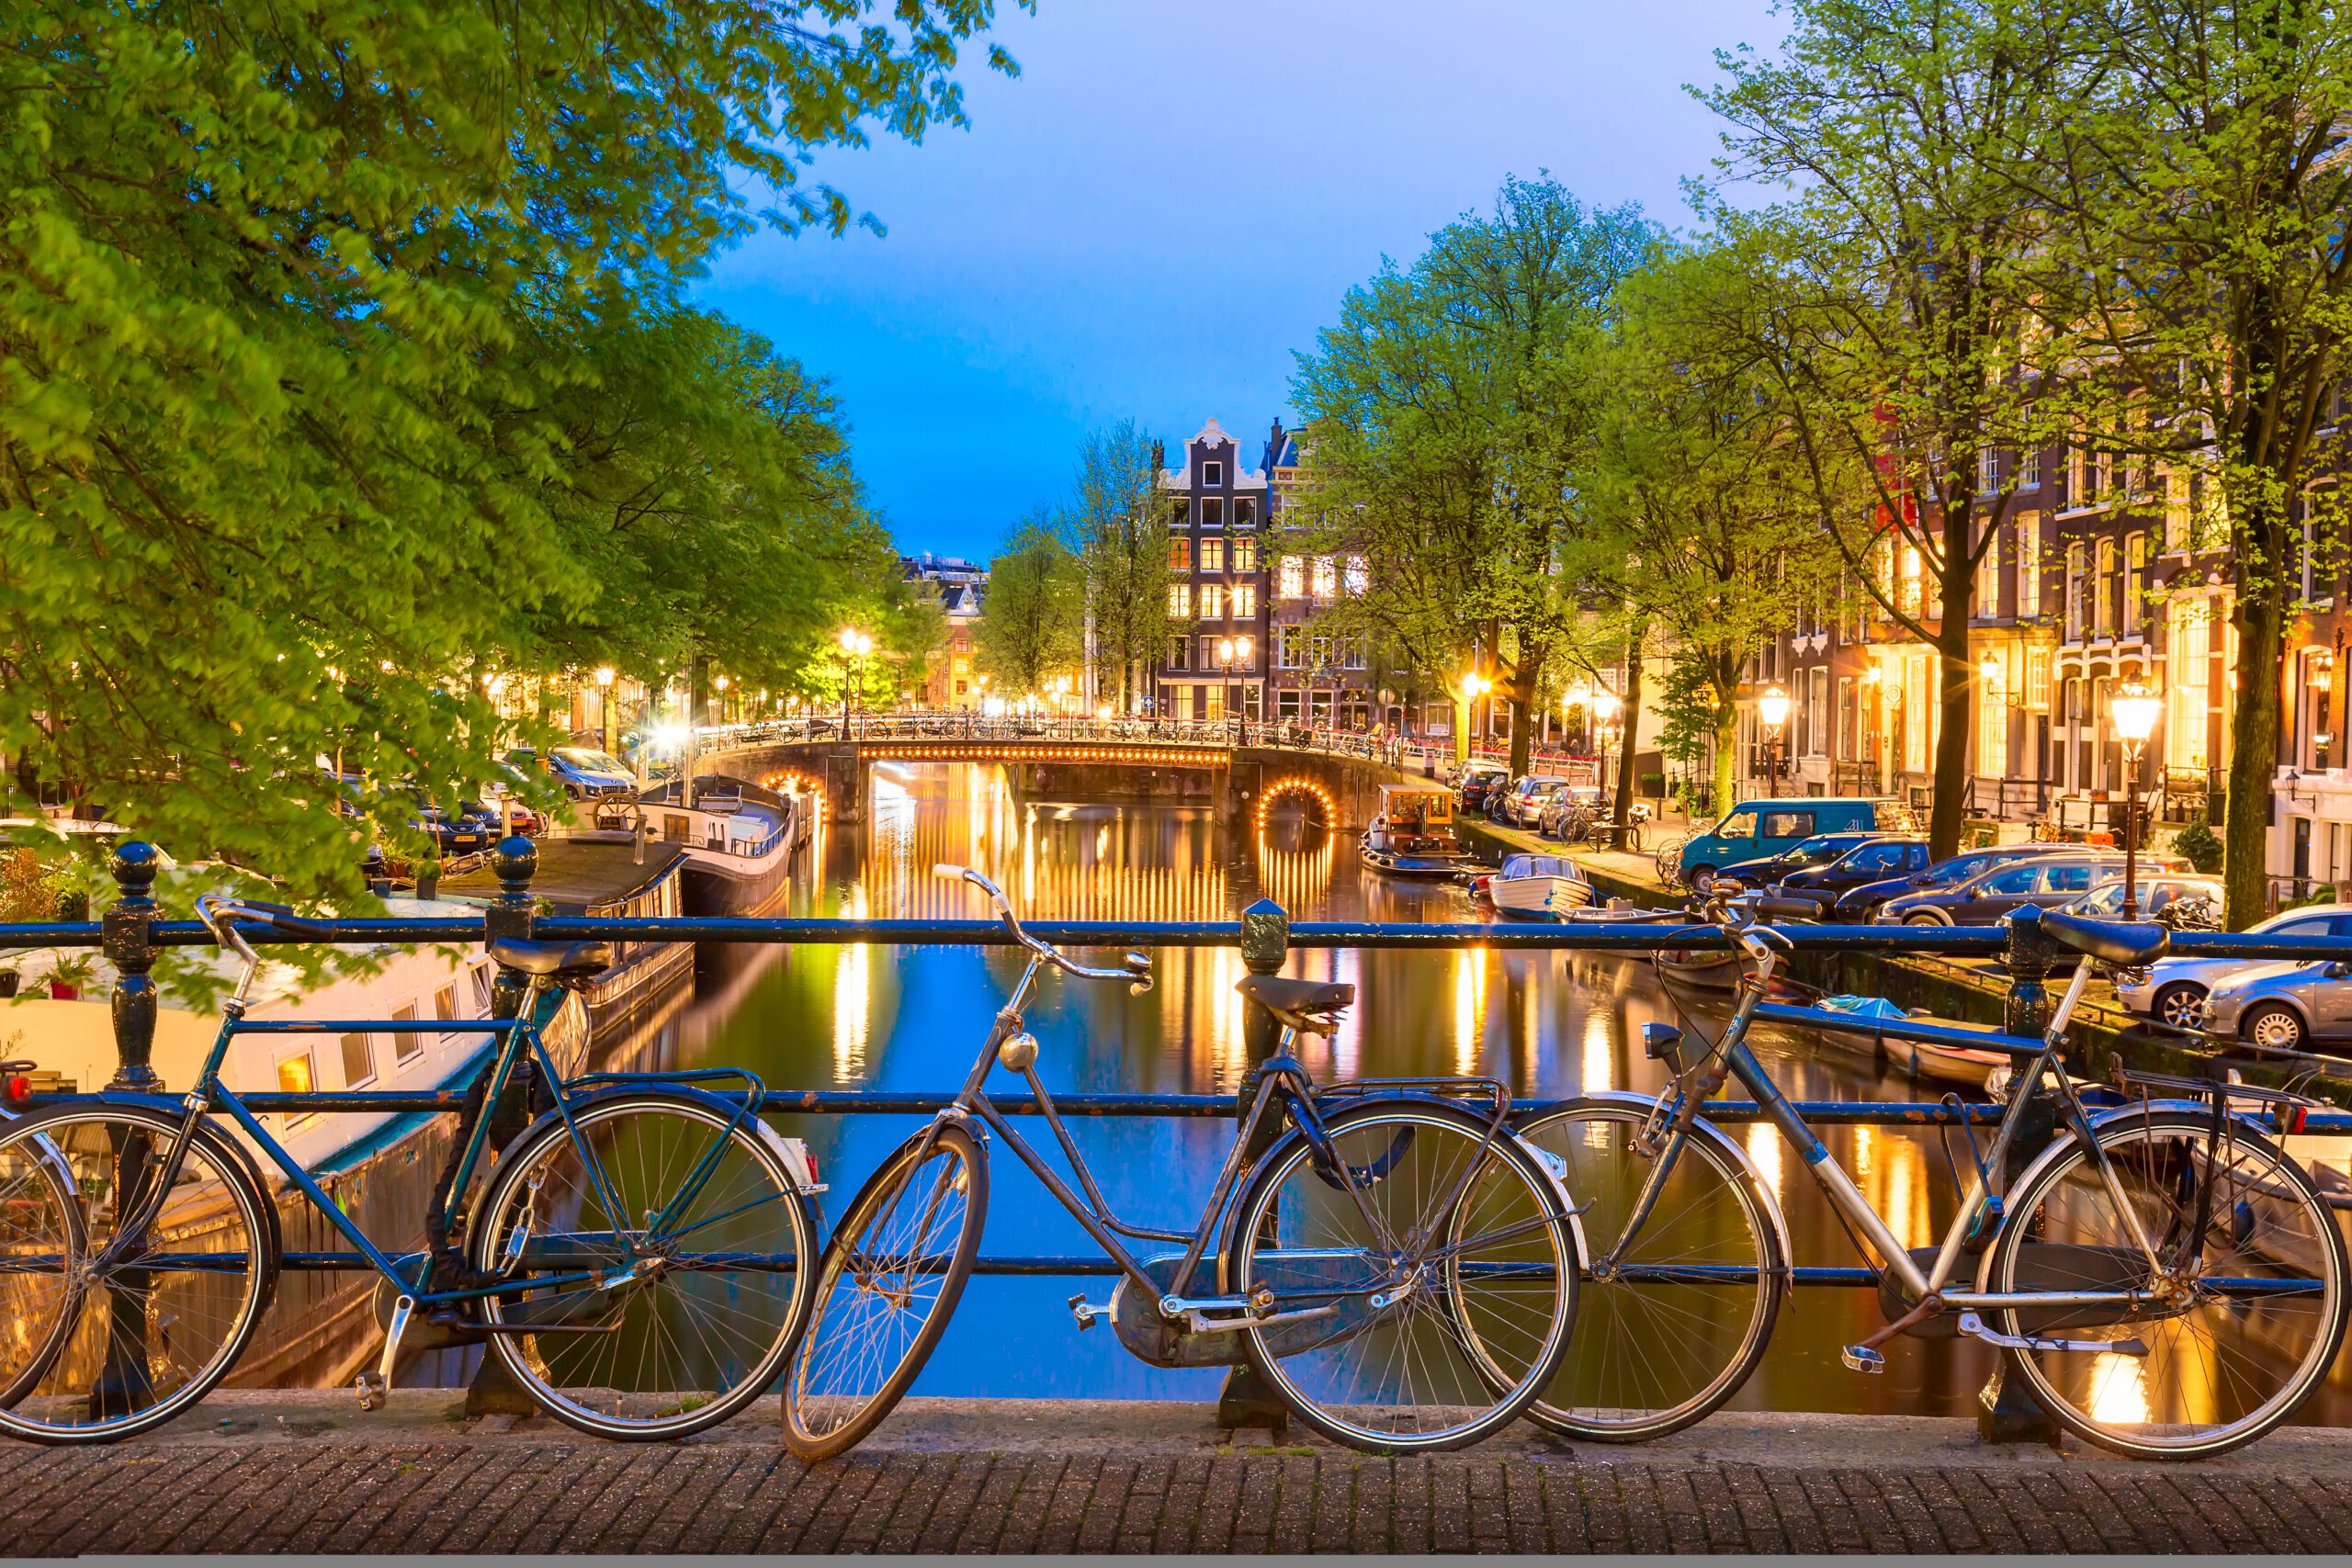 Old bicycles on the bridge in Amsterdam, Netherlands against a canal during summer twilight sunset. Amsterdam postcard iconic view. Tourism concept.